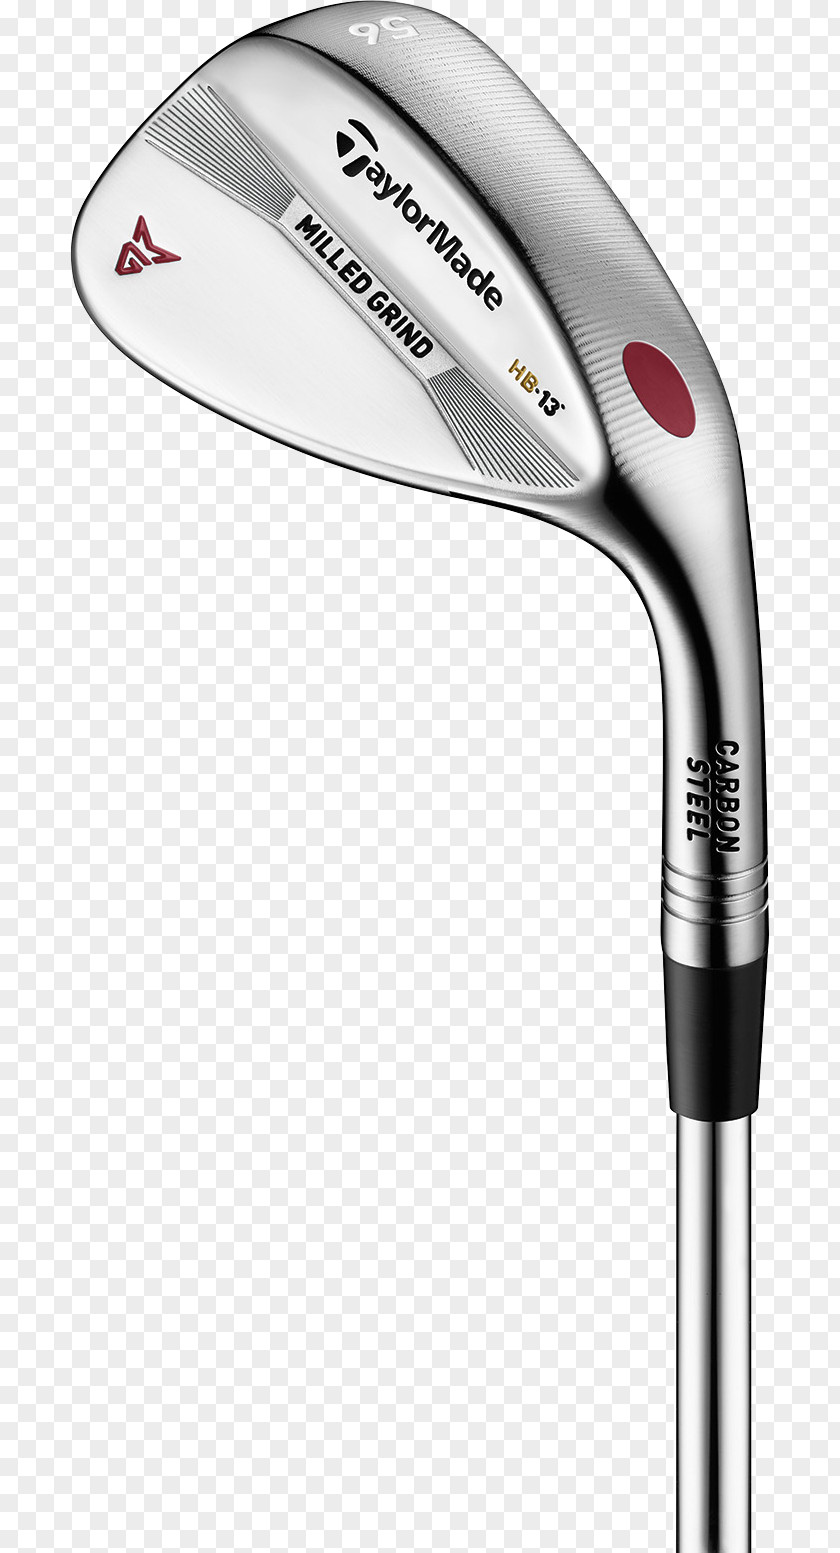 Golf TaylorMade Milled Grind Wedge Clubs PNG